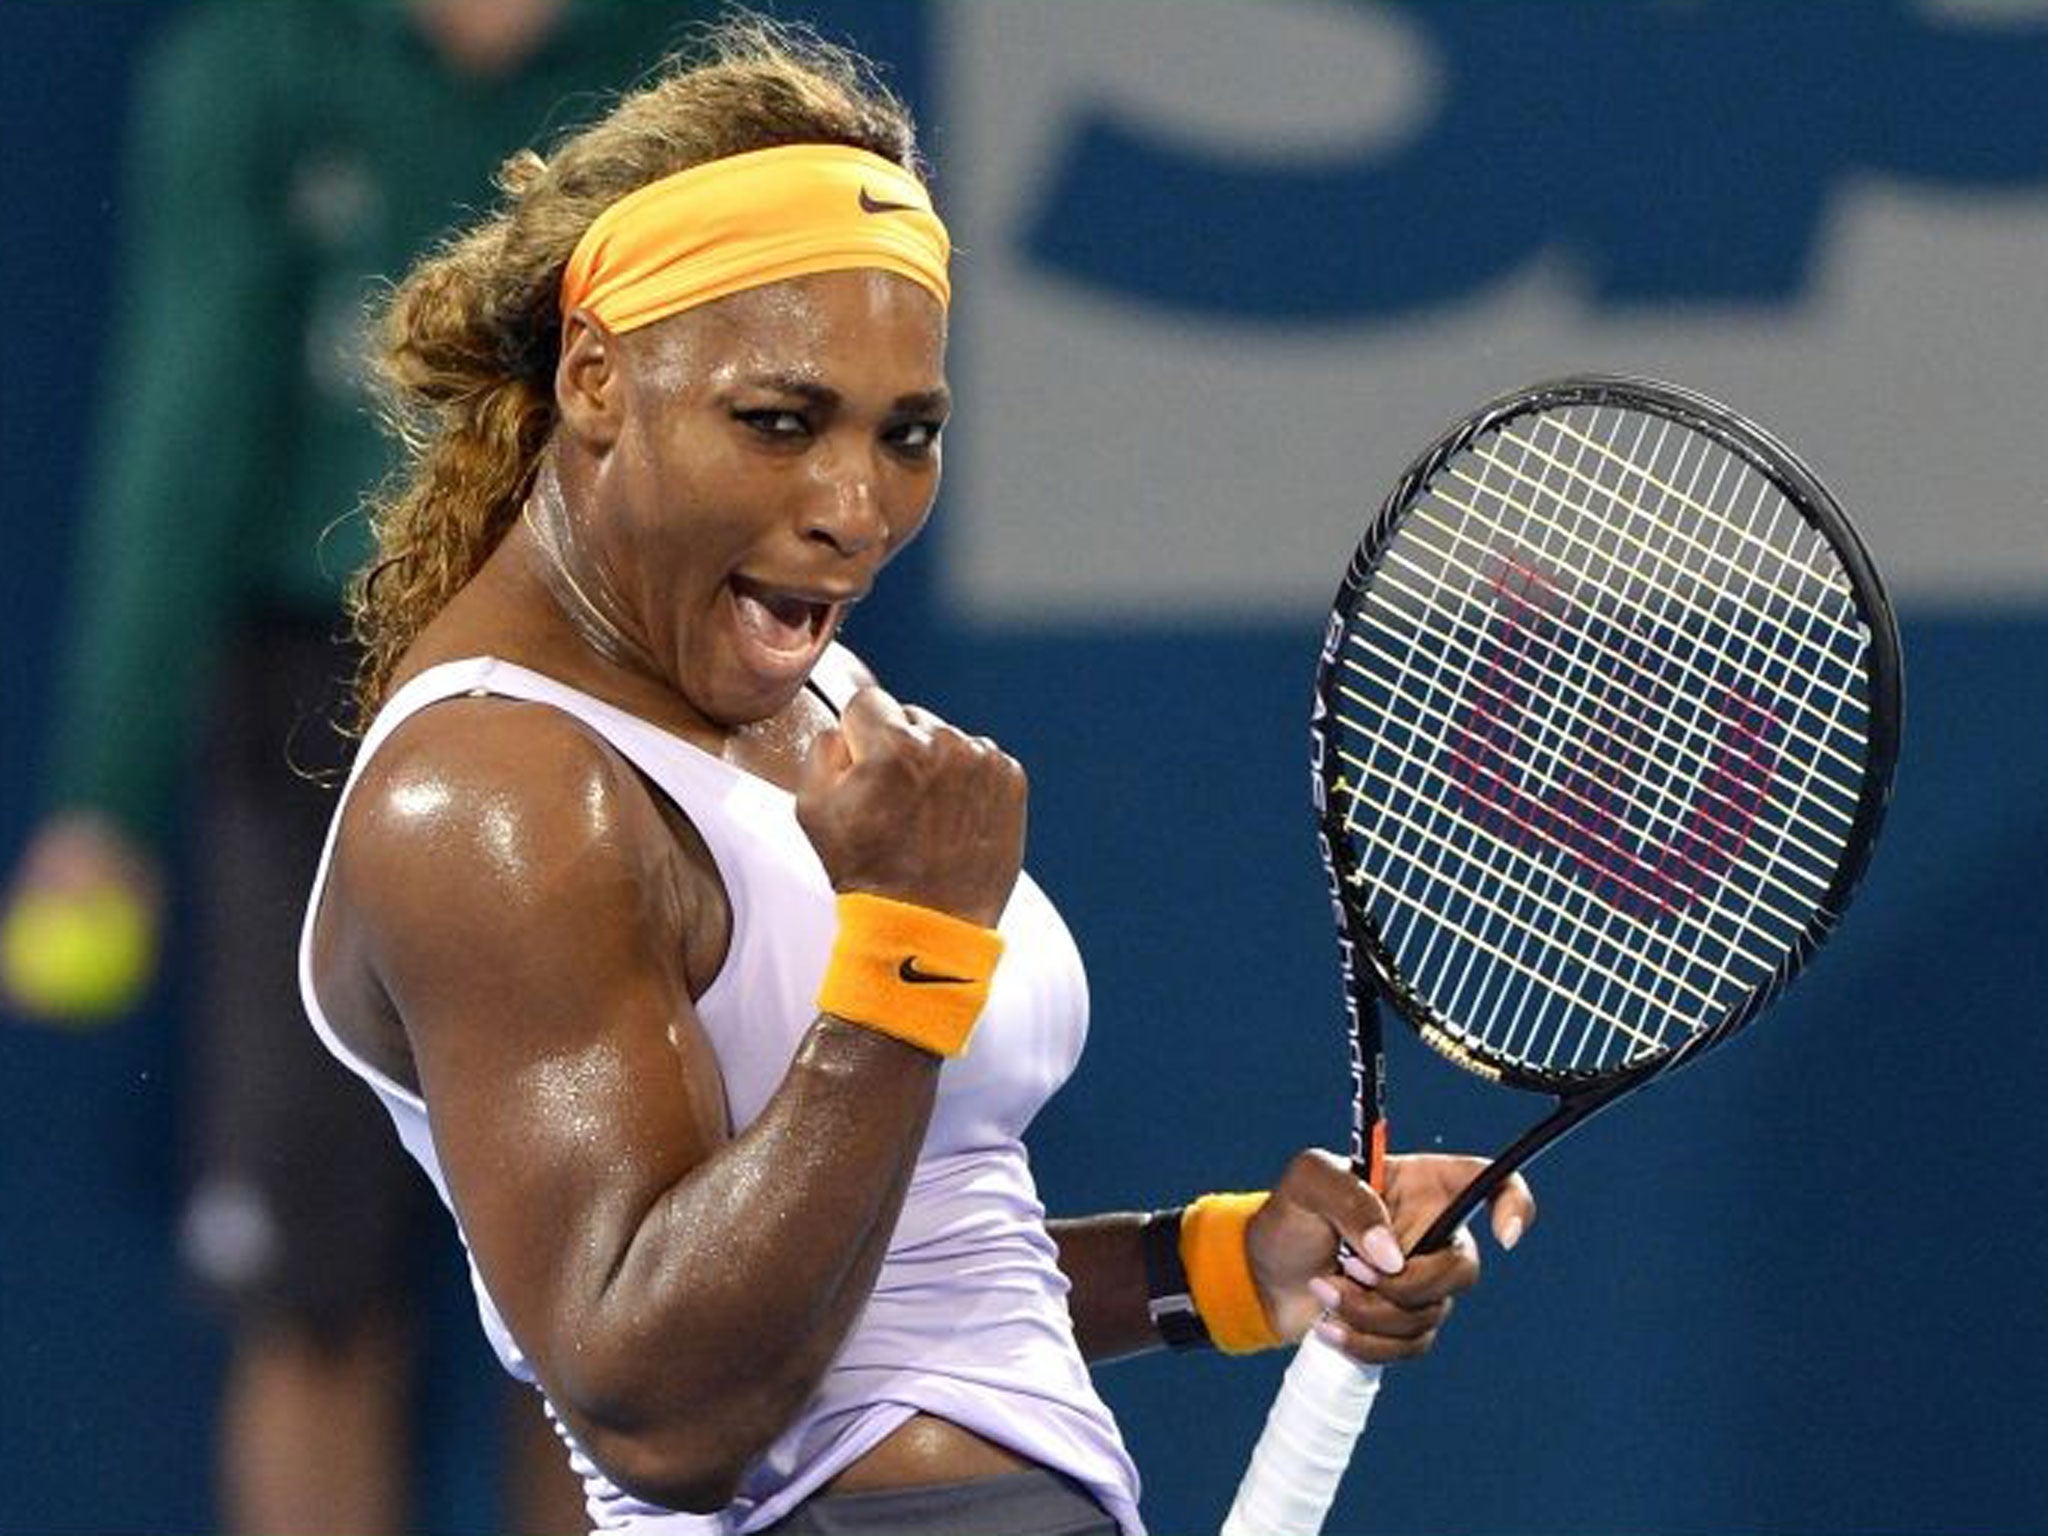 Power play: Serena Williams, with 17 Grand Slam titles to date, has every chance of overhauling Margaret Court (24) and Steffi Graf (22) before she is finished